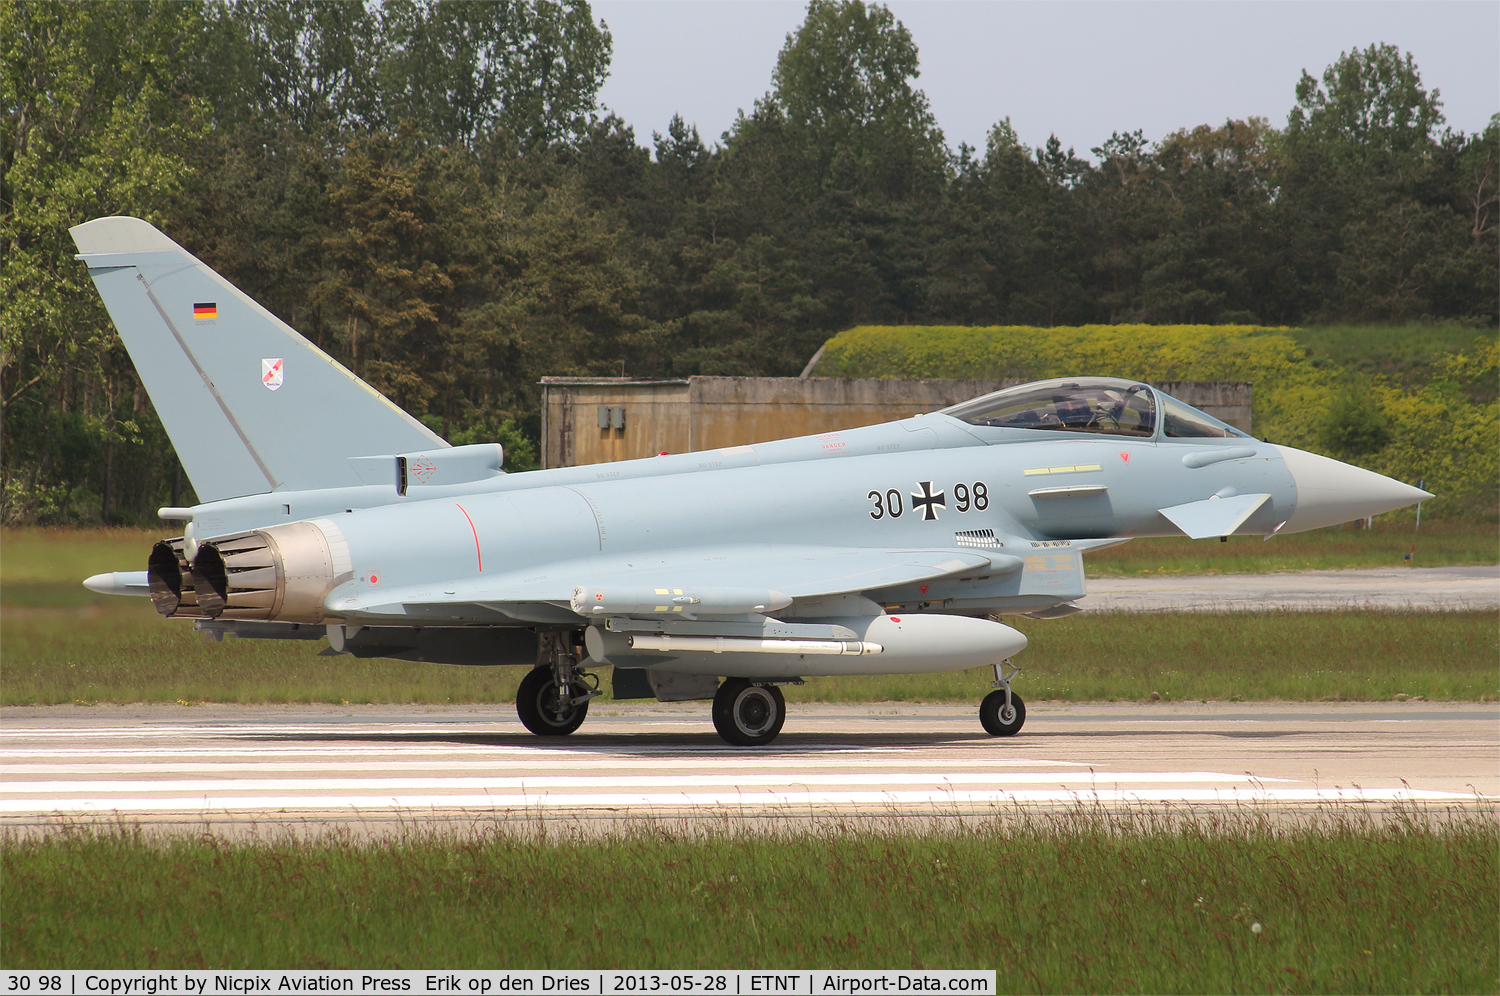 30 98, Eurofighter EF-2000 Typhoon S C/N GS076, EF-2000 3098 seen her on the runway of Wittmund AB